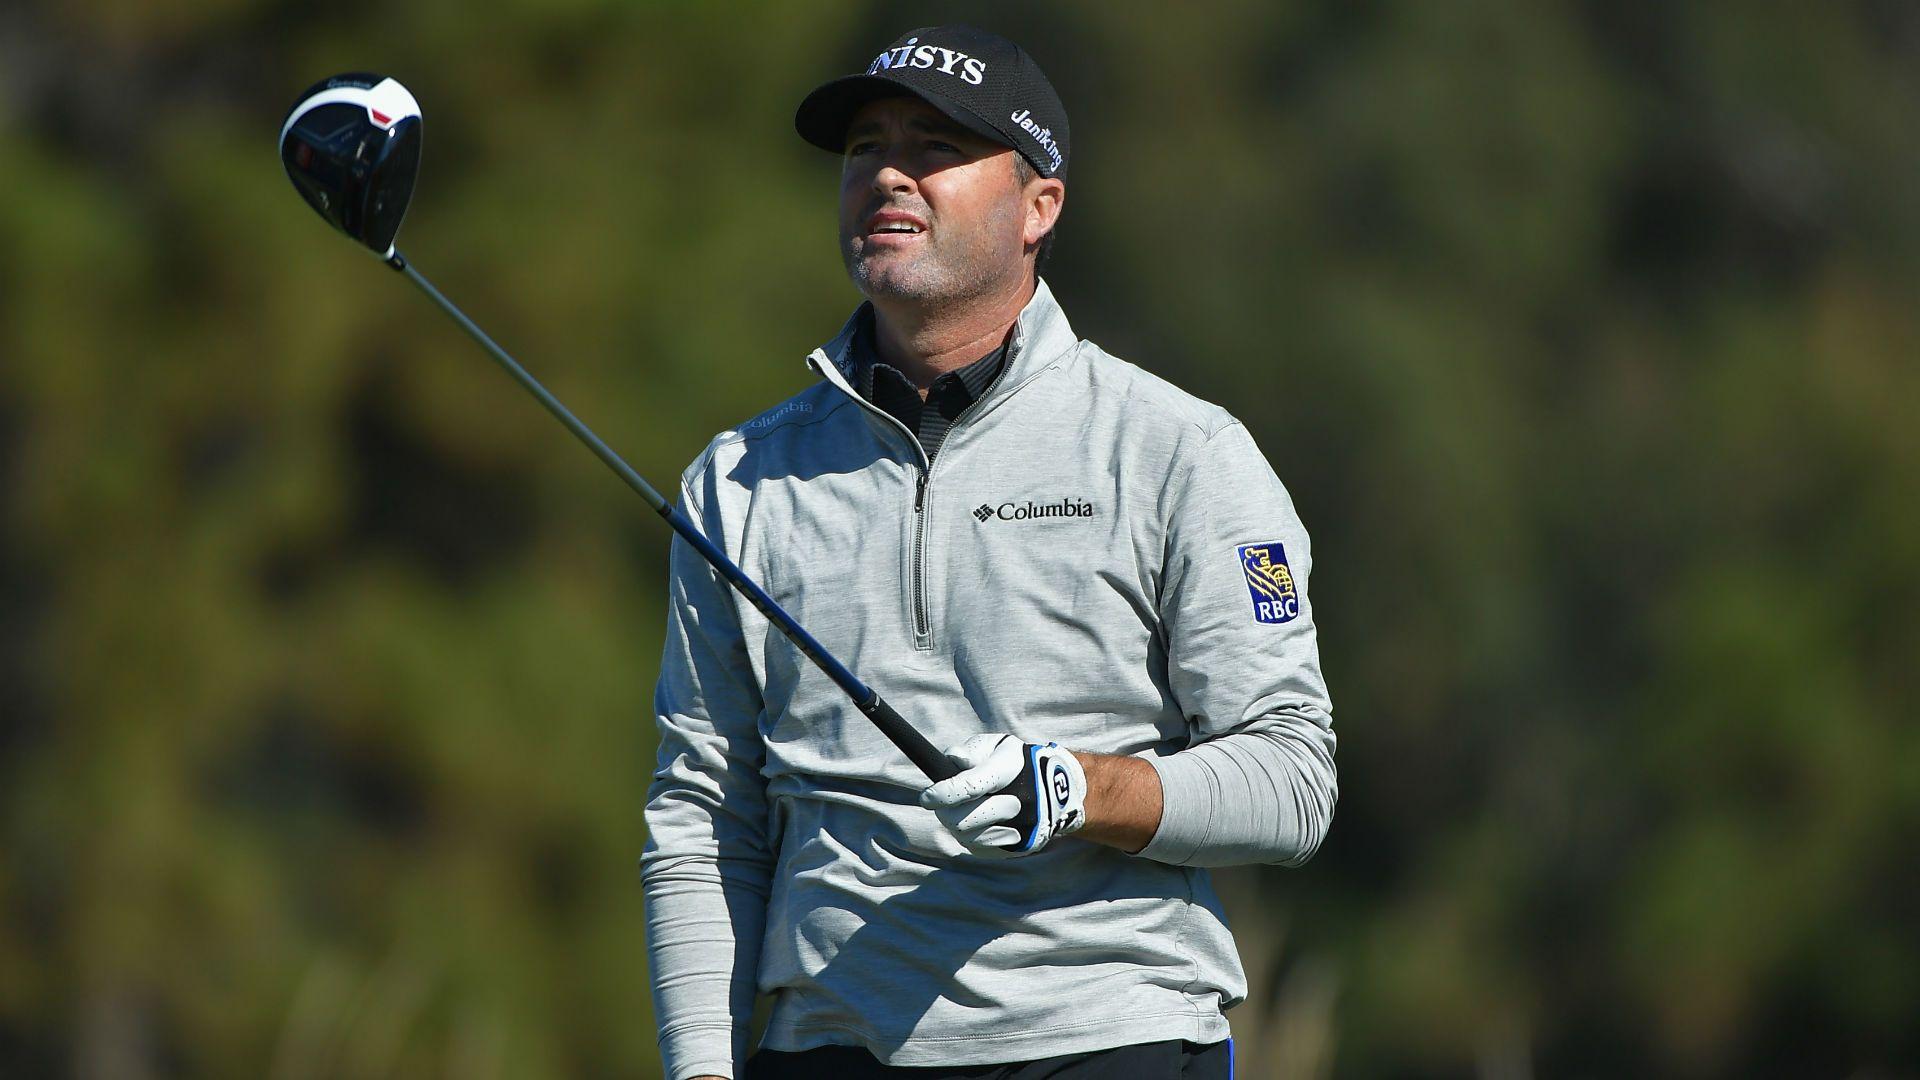 Farmers Insurance Open: Ryan Palmer leads after two rounds; Tiger